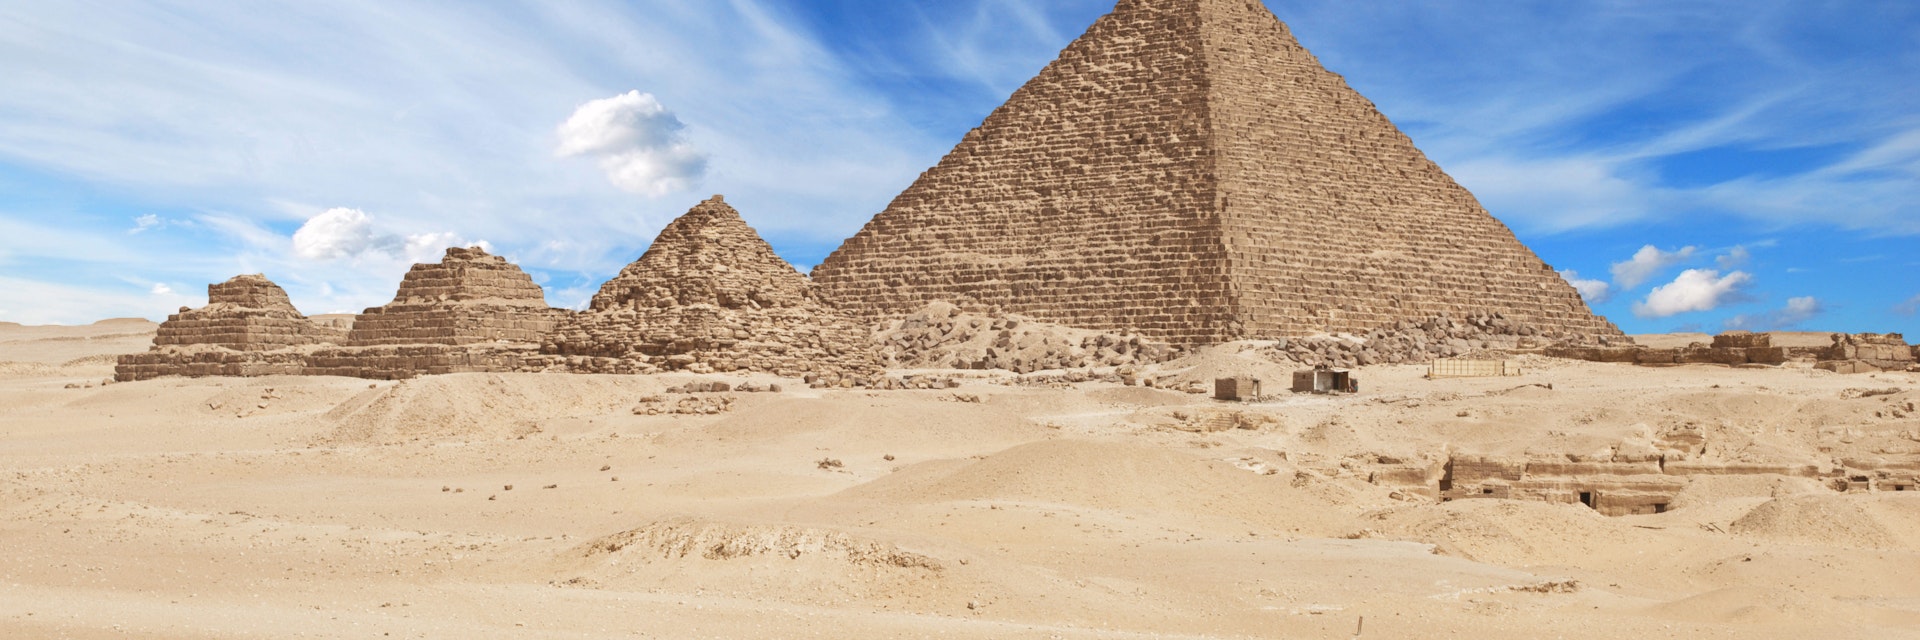 Pyramids in Giza
ancient, antiquities, archeology, architecture, building, cairo, cheops, chephren, civilization, culture, desert, egypt, egyptian, exterior, giza, heritage, khafre, khufu, landmark, landscape, menkaure, monument, mykerinos, nobody, old, outdoors, panoramic, pyramid, scenic, site, sky, stone, tourism, traditional, travel, unesco, vibrant, vintage, world